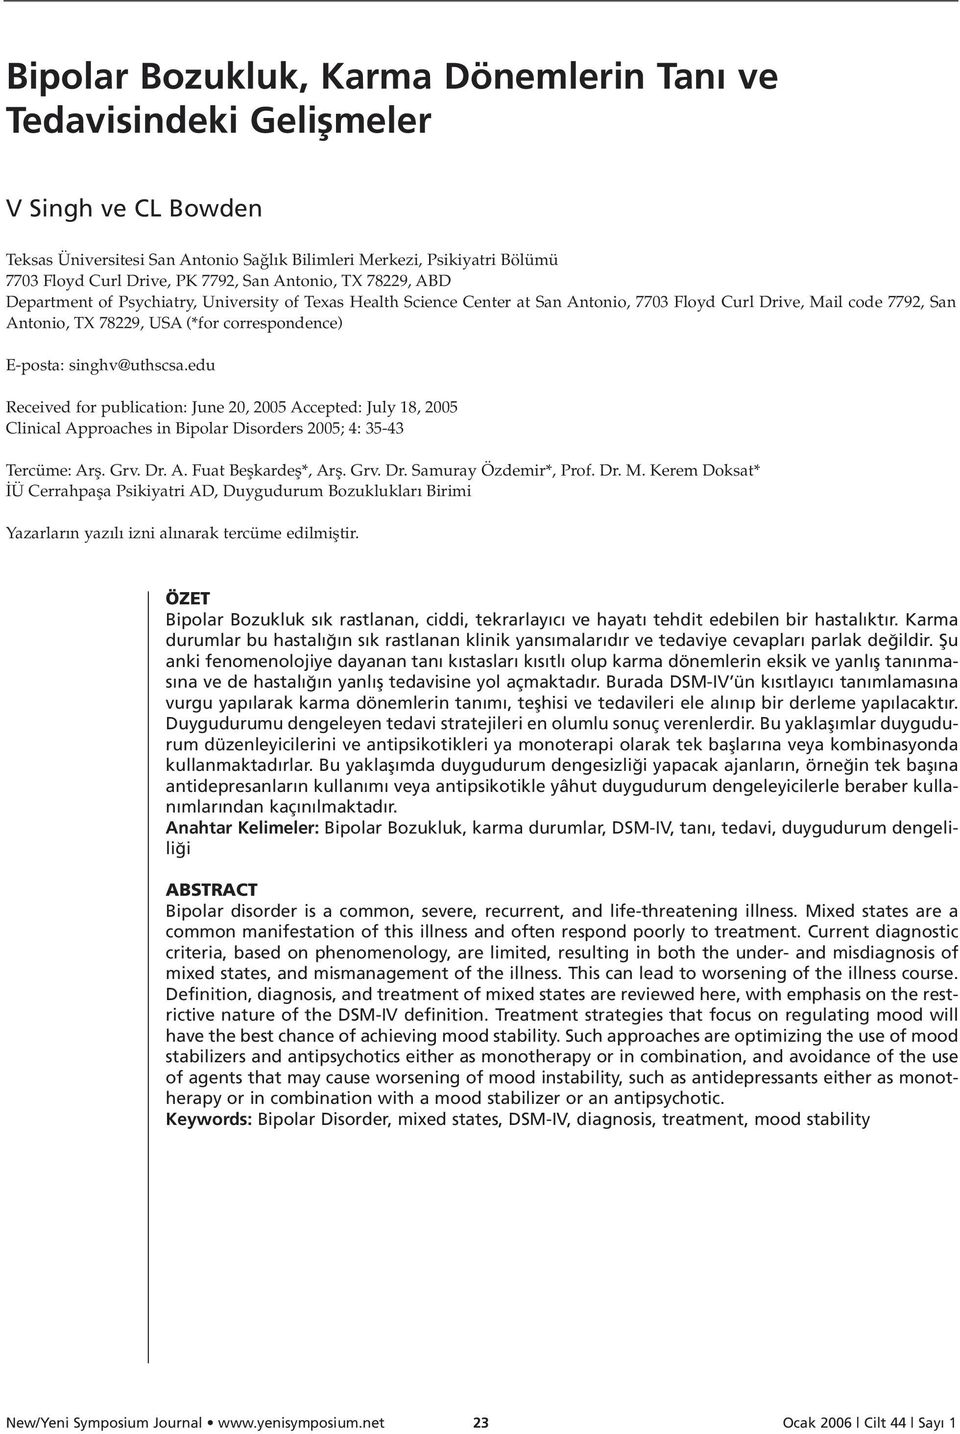 E-posta: singhv@uthscsa.edu Received for publication: June 20, 2005 Accepted: July 18, 2005 Clinical Approaches in Bipolar Disorders 2005; 4: 35-43 Tercüme: Arfl. Grv. Dr. A. Fuat Beflkardefl*, Arfl.